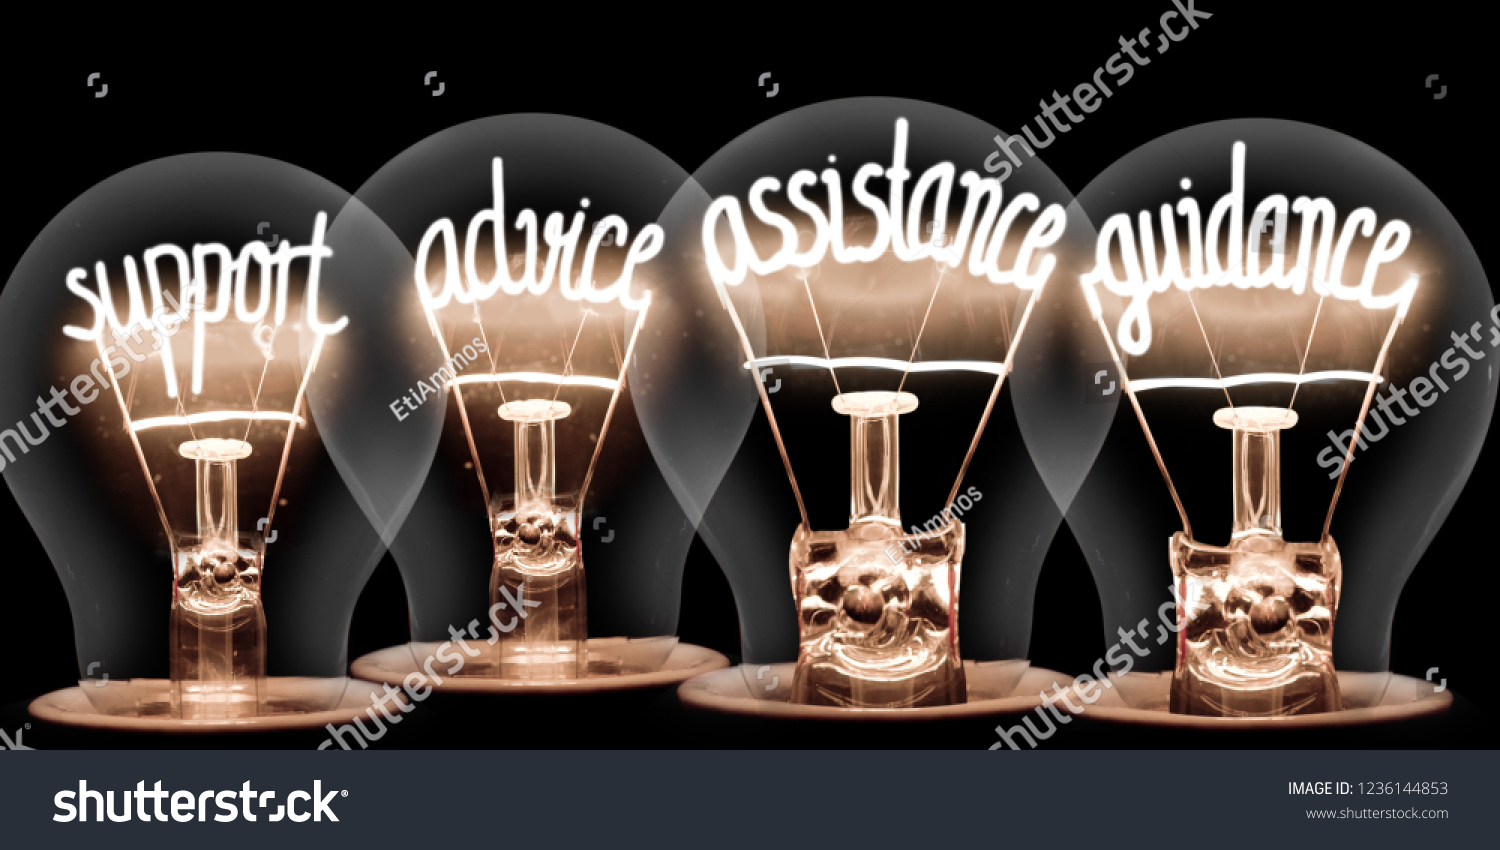 Photo of light bulbs group with shining fibers in a shape of SUPPORT, ADVICE, ASSISTANCE, GUIDANCE concept words isolated on black background #1236144853